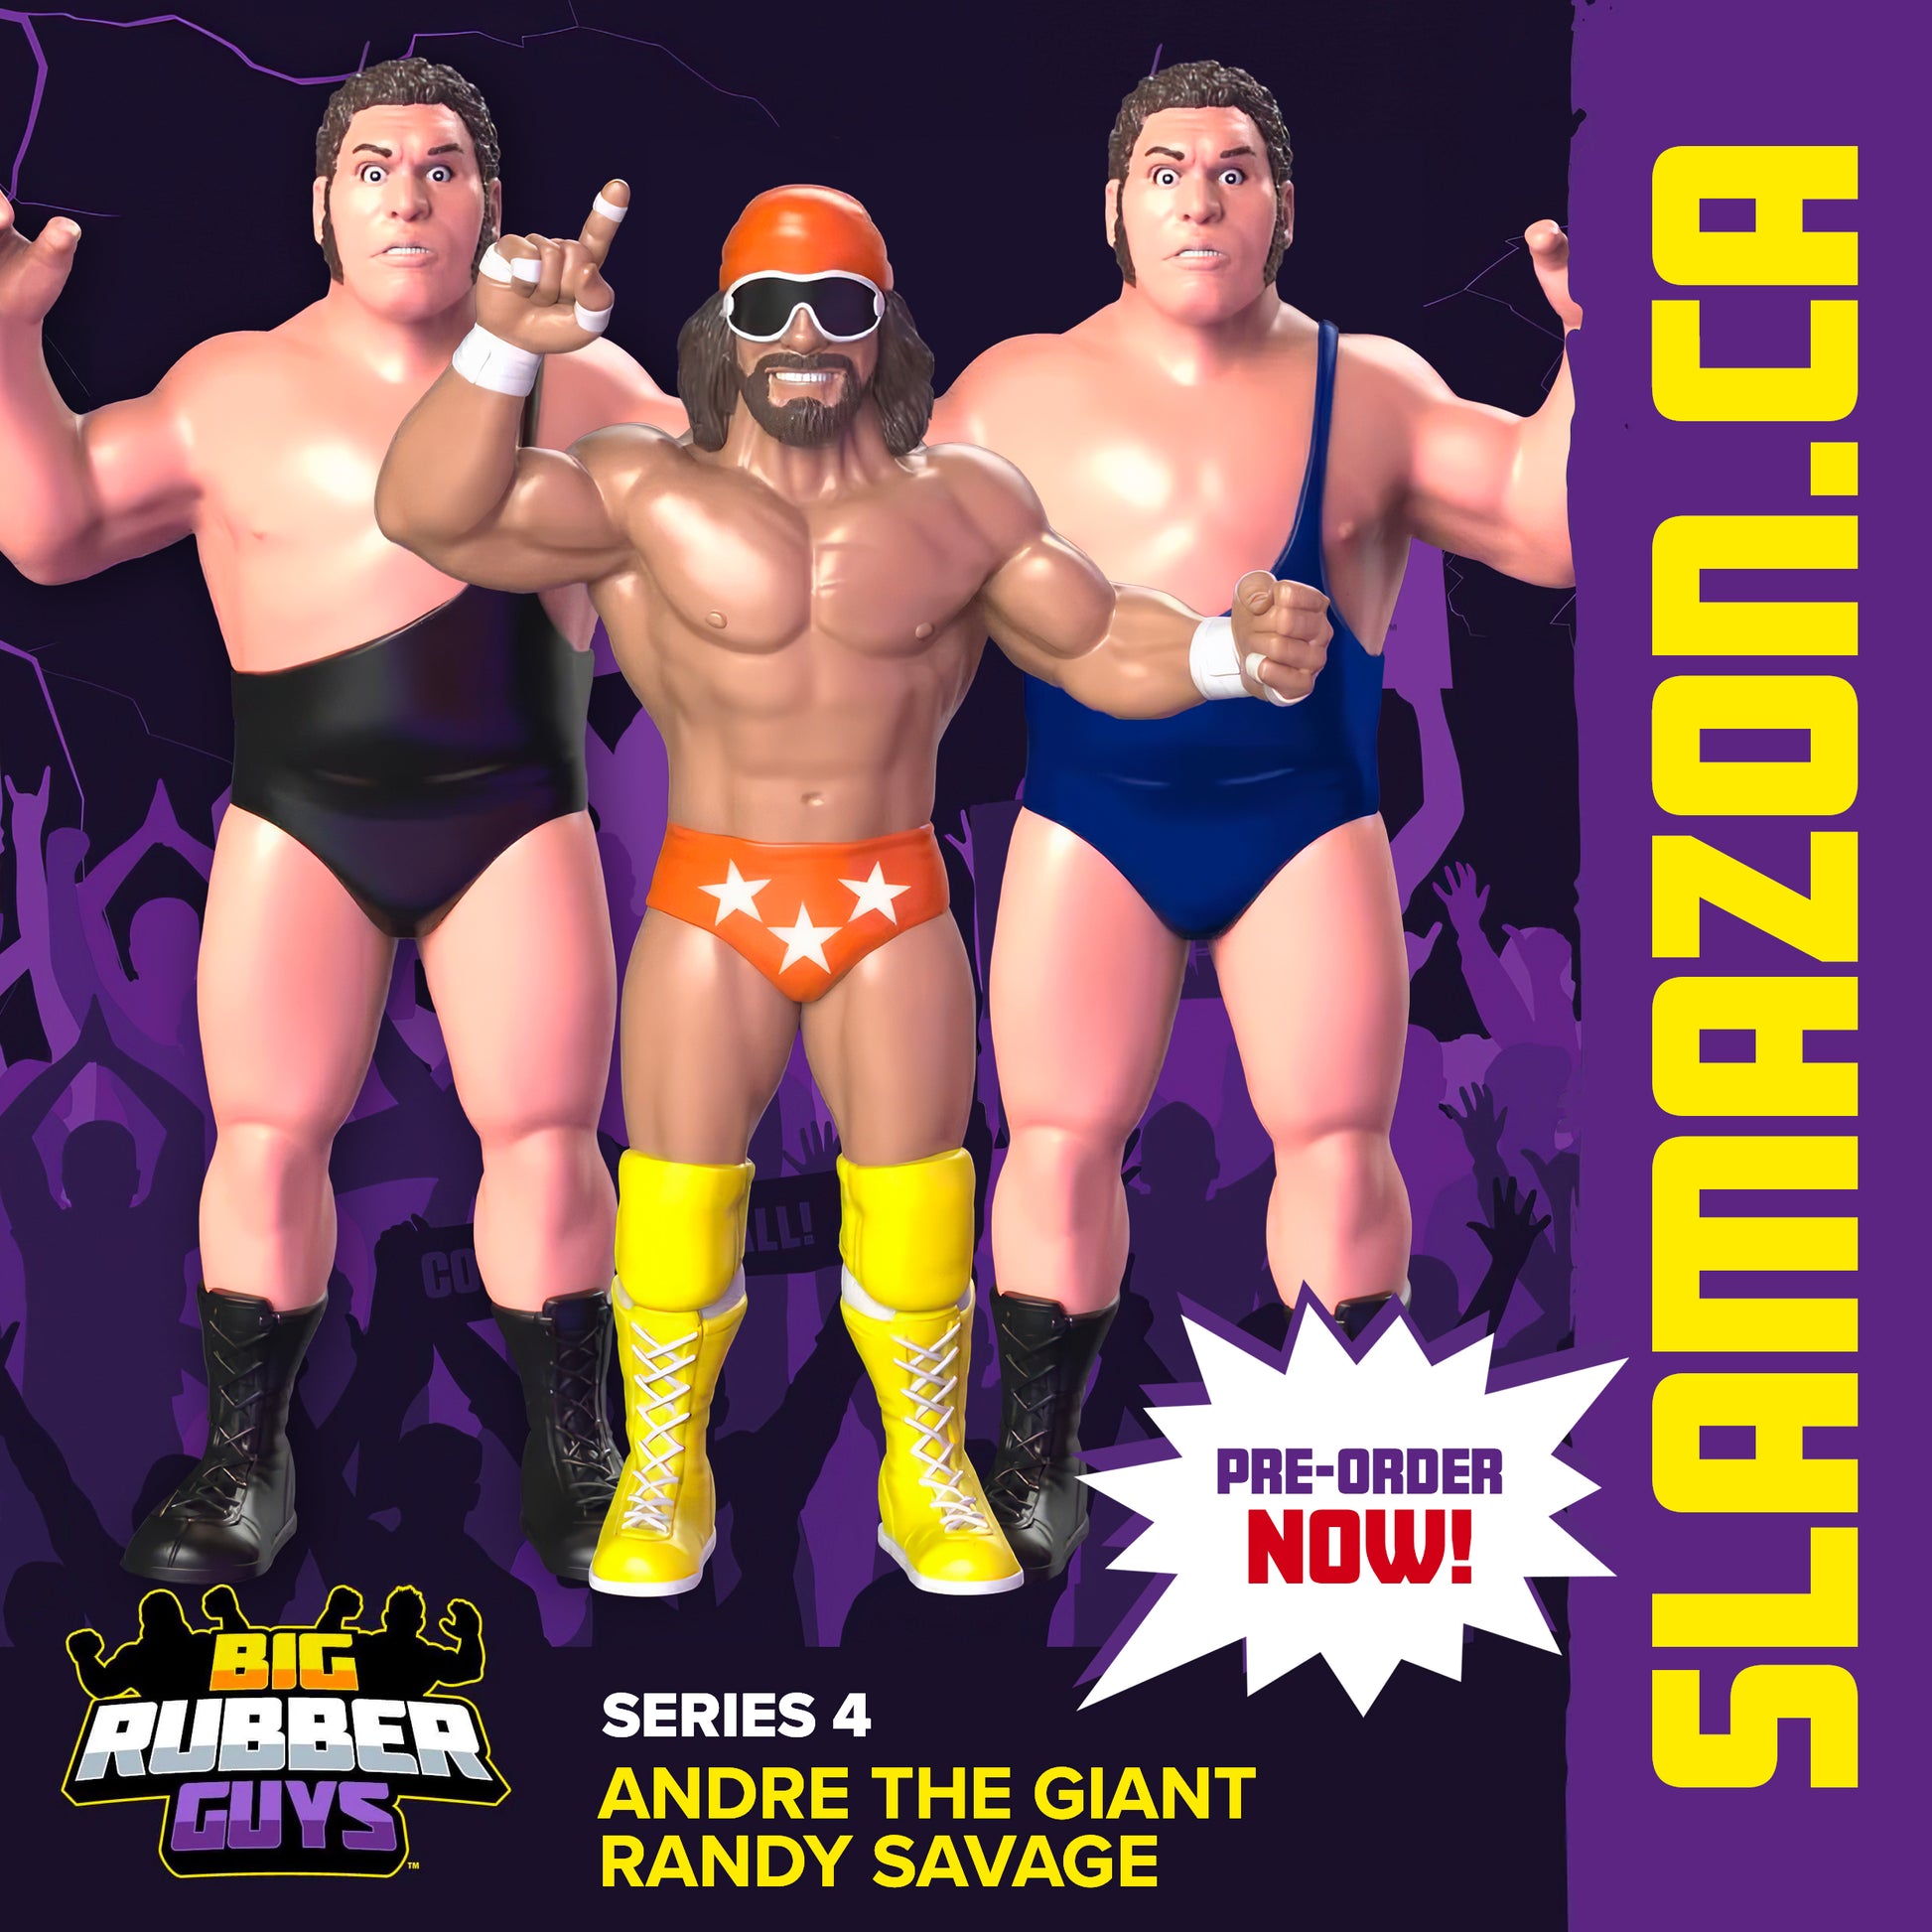 Big Rubber Guys Macho Man Randy Savage and Andre The Giant figures available at slamazon.ca